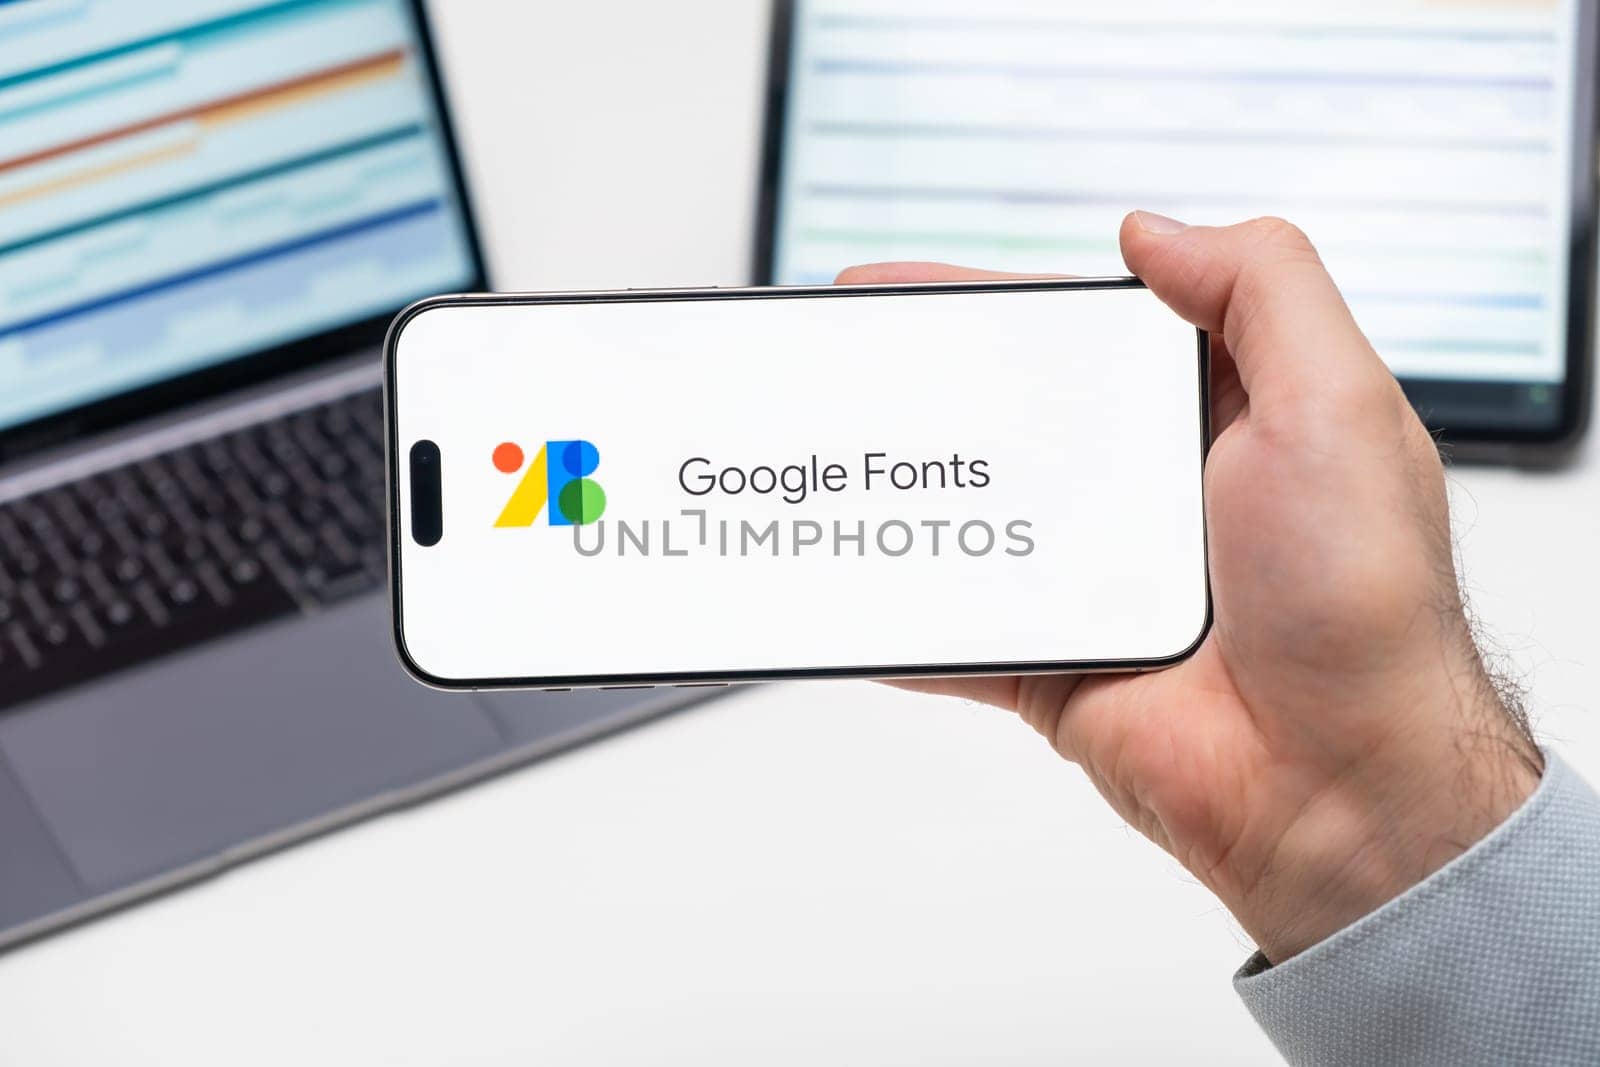 Google Fonts application logo on the screen of smart phone in mans hand, laptop and tablet on the table by vladimka